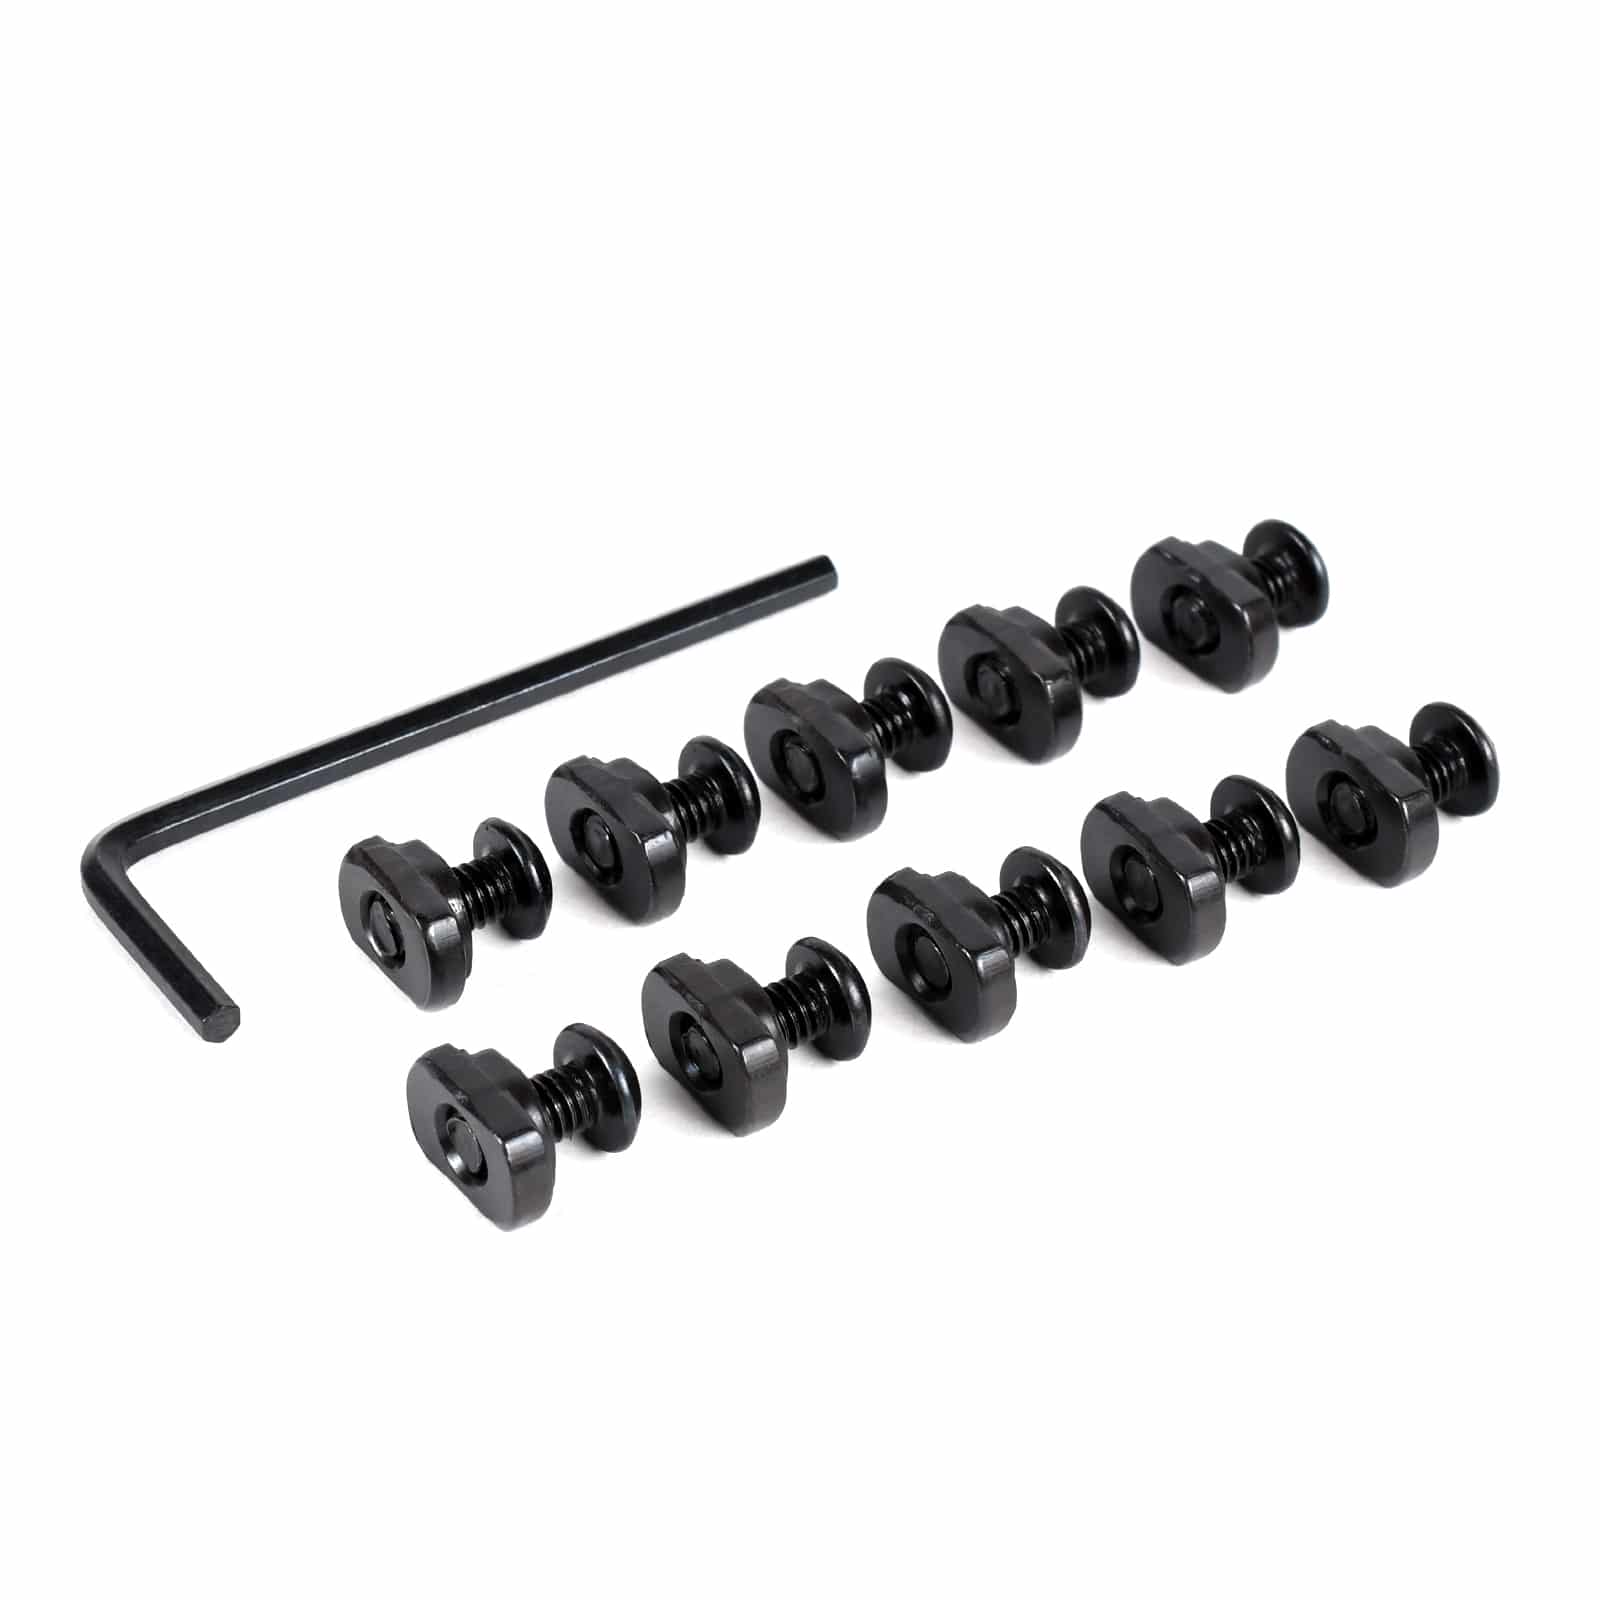 10 Pack M-Lock Screw and Nut Replacement Set For Rail Sections & Wrench 